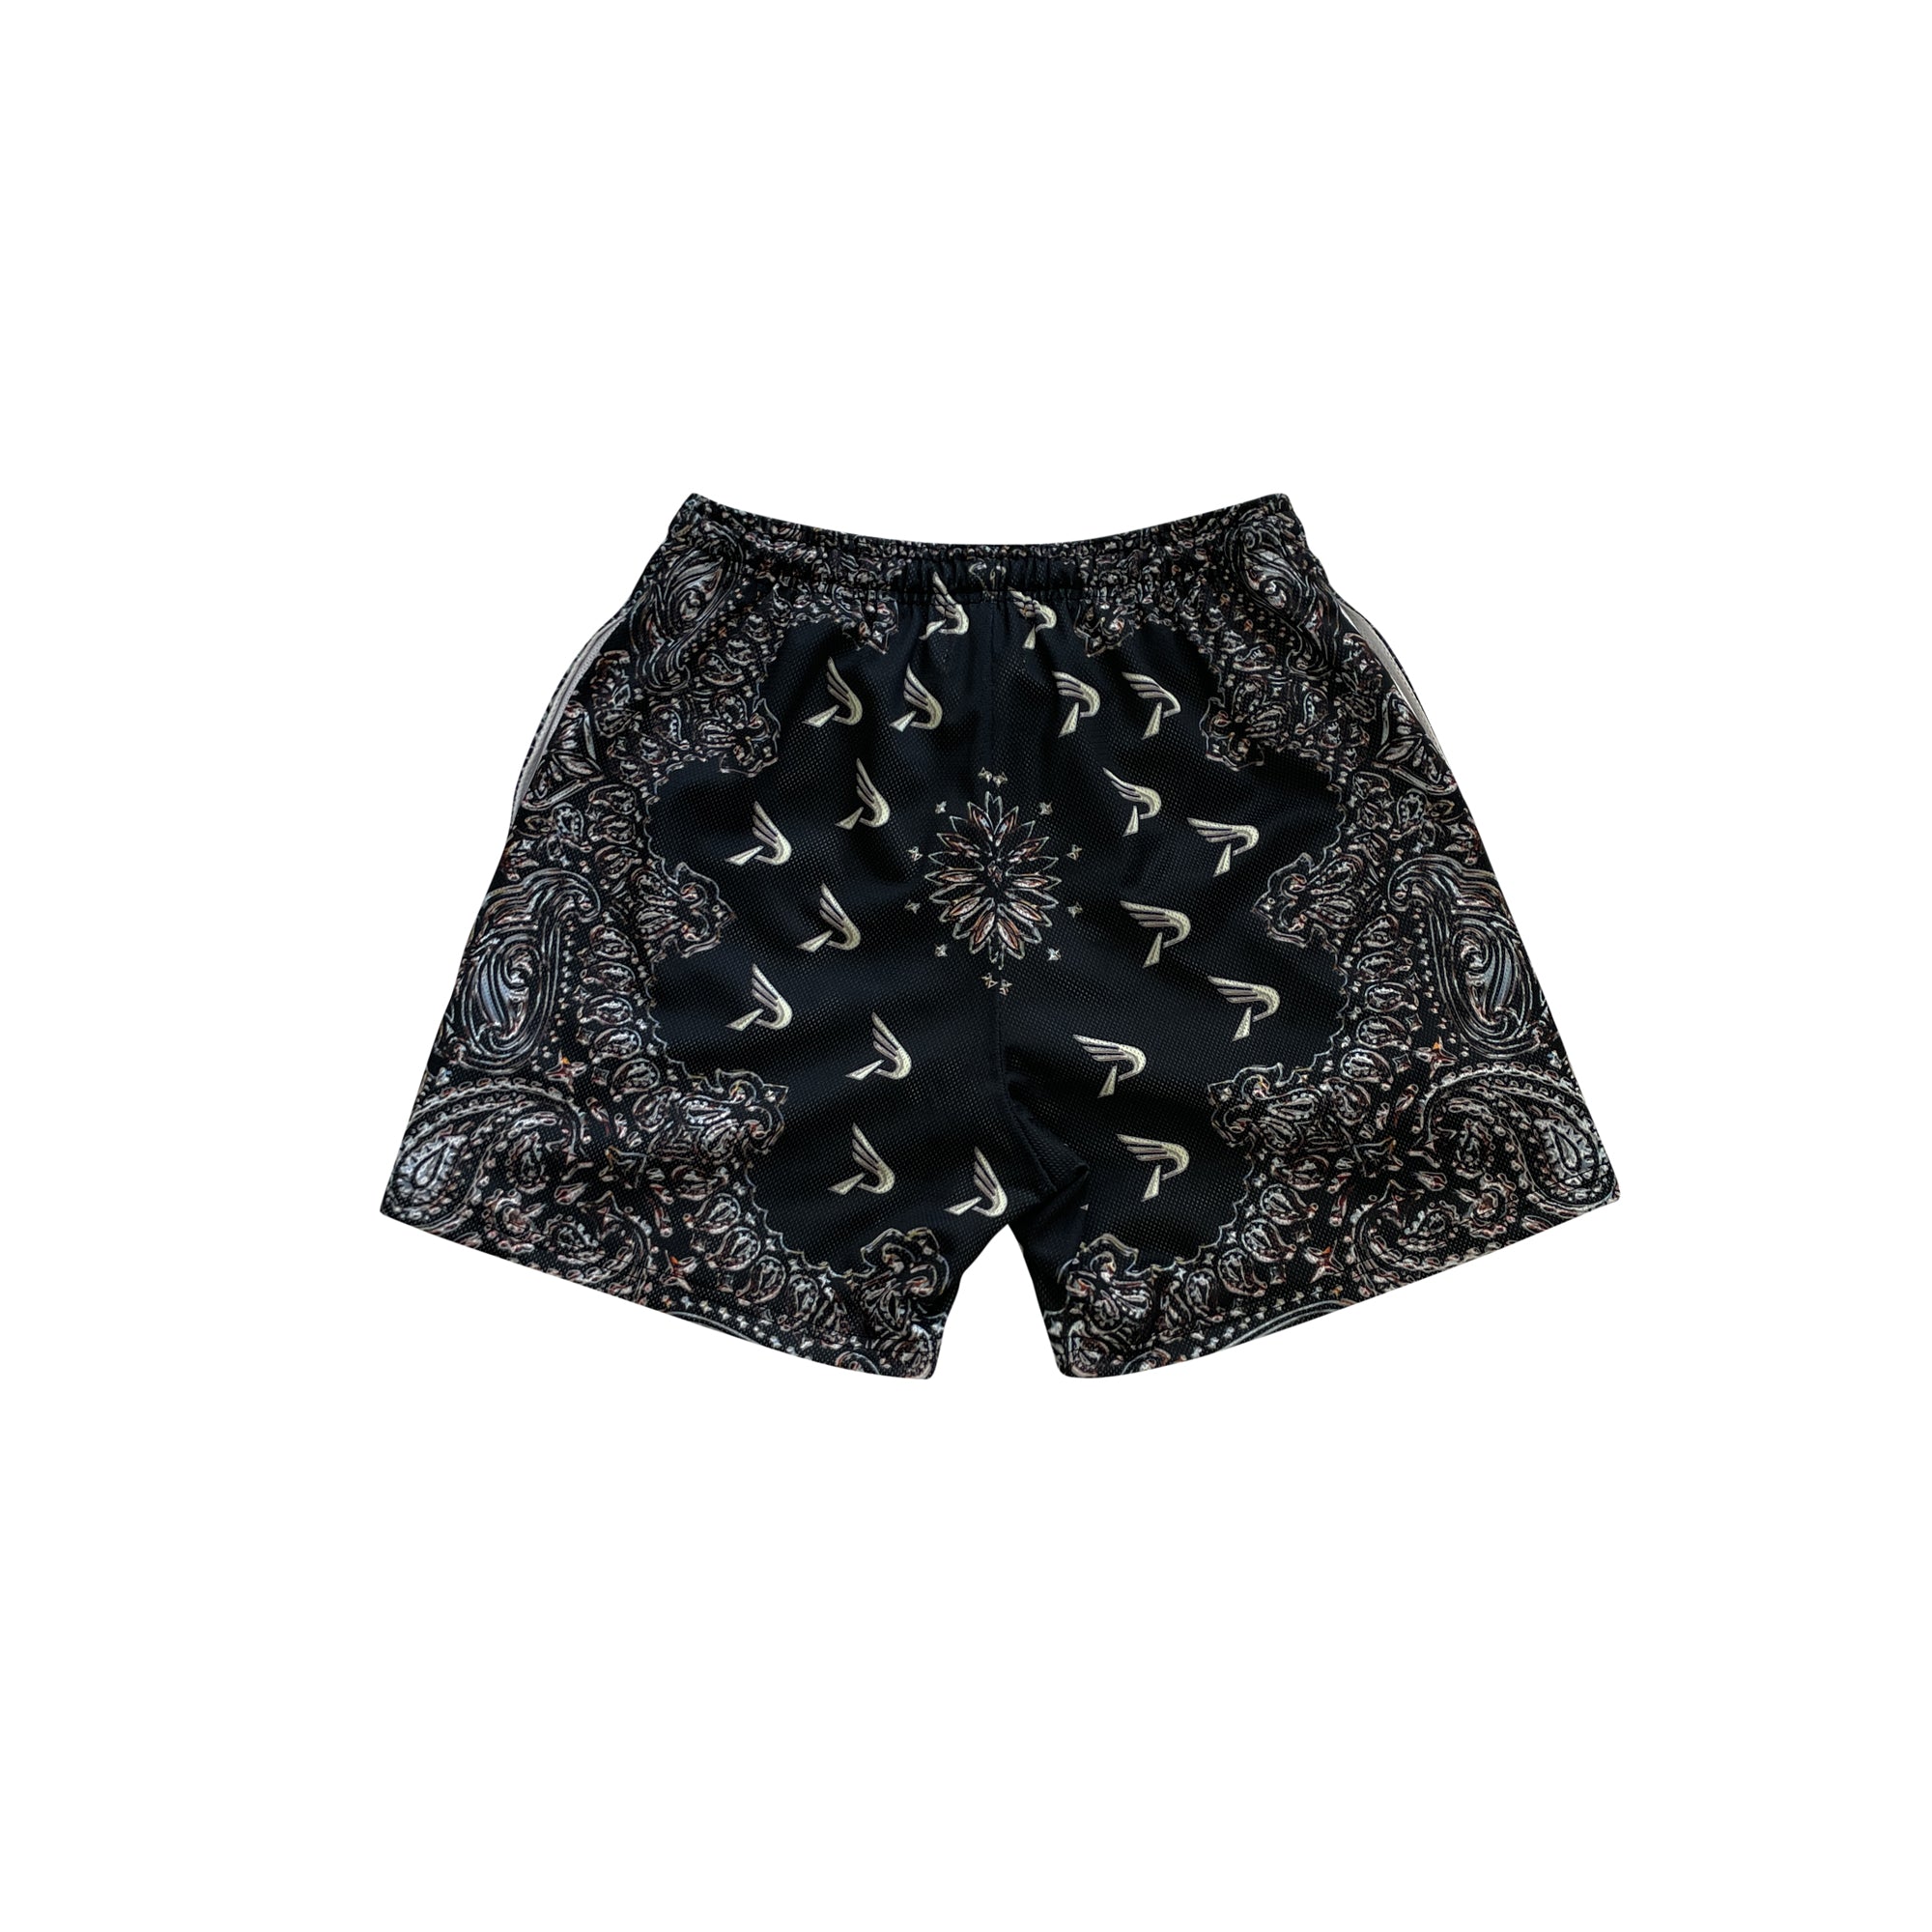 Povrich chrome shorts in black. Comfortable and stylish shorts for any occasion